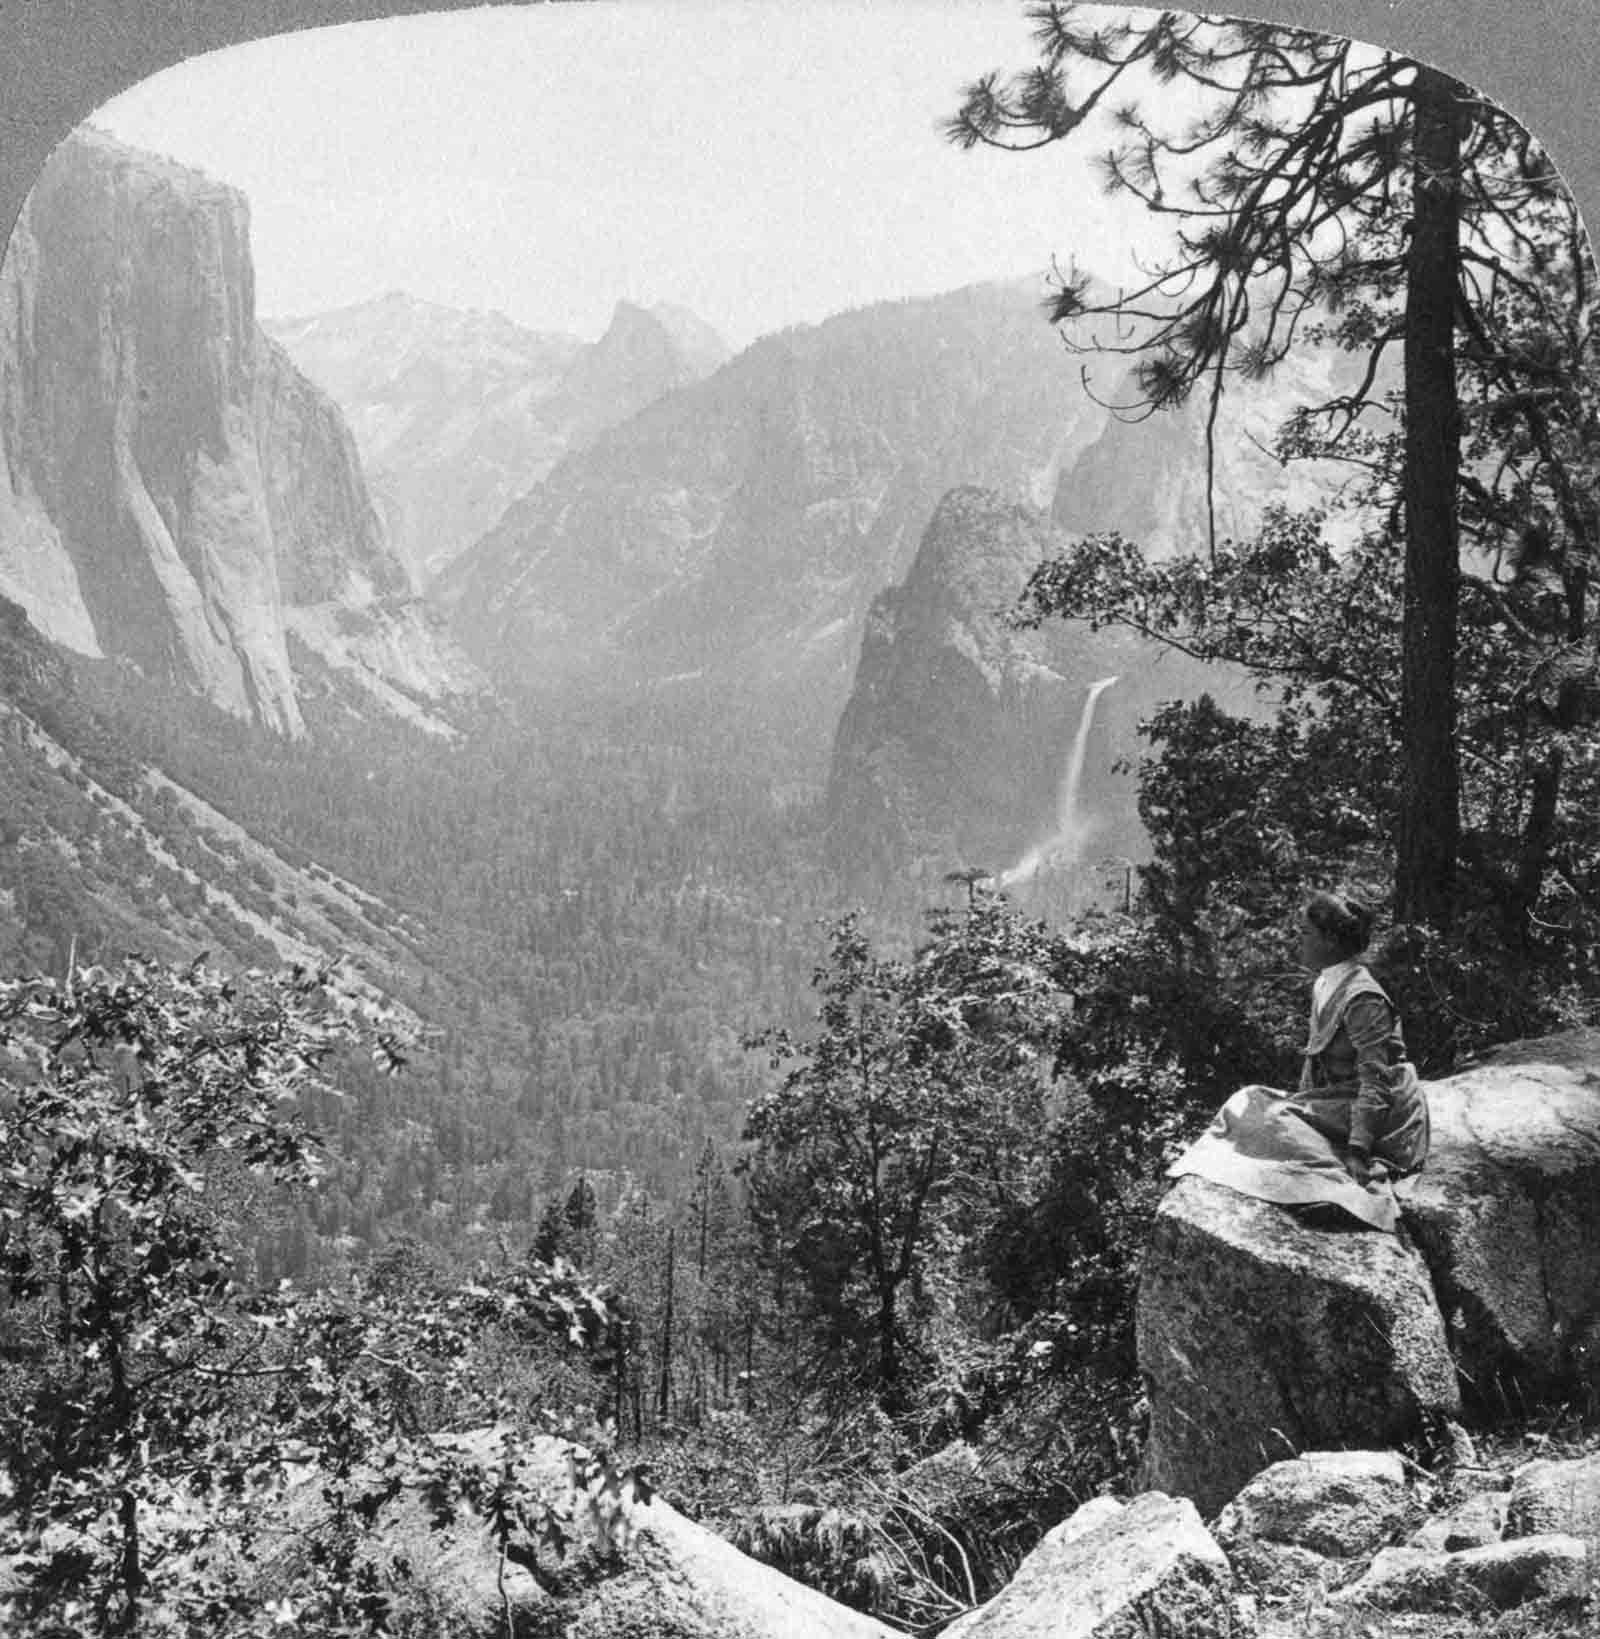 1The view of Yosemite Valley from Inspiration Point, 1902.